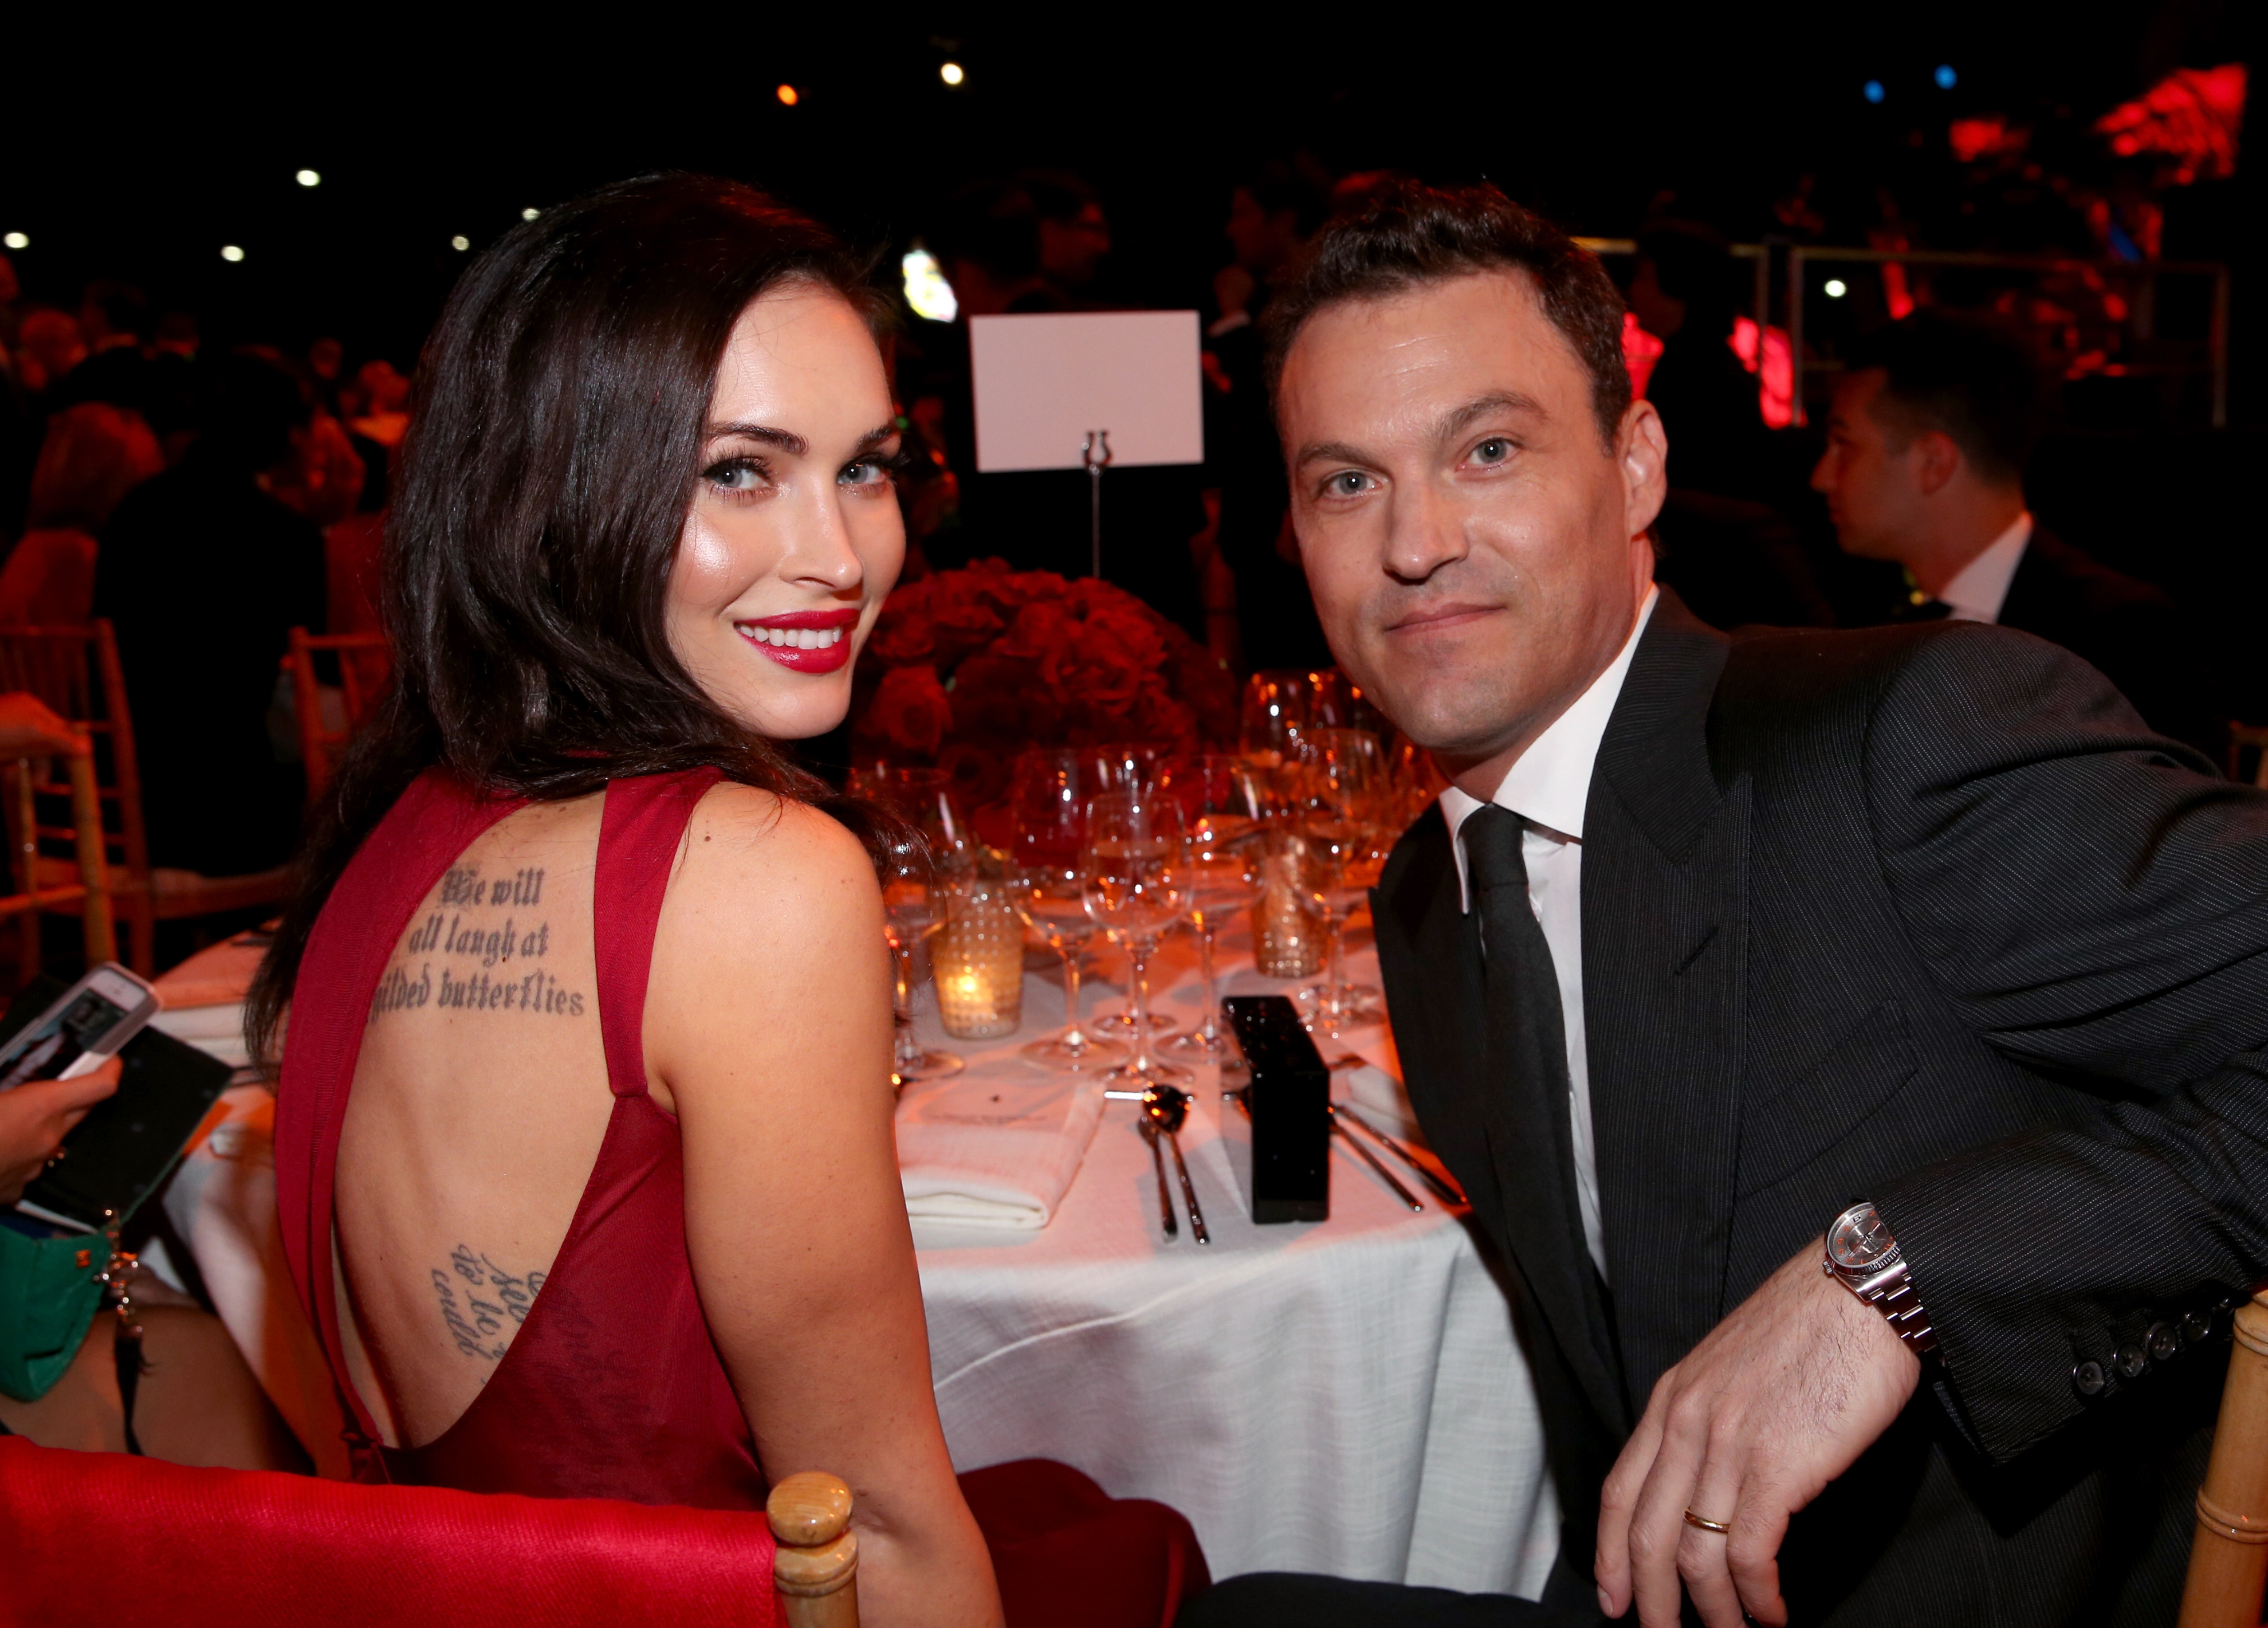 LOS ANGELES, CA - OCTOBER 11:  Actors Megan Fox (L) and Brian Austin Green attend Ferrari Celebrates 60 Years In America on October 11, 2014 in Los Angeles, California.  (Photo by Jonathan Leibson/Getty Images for Ferrari North America)